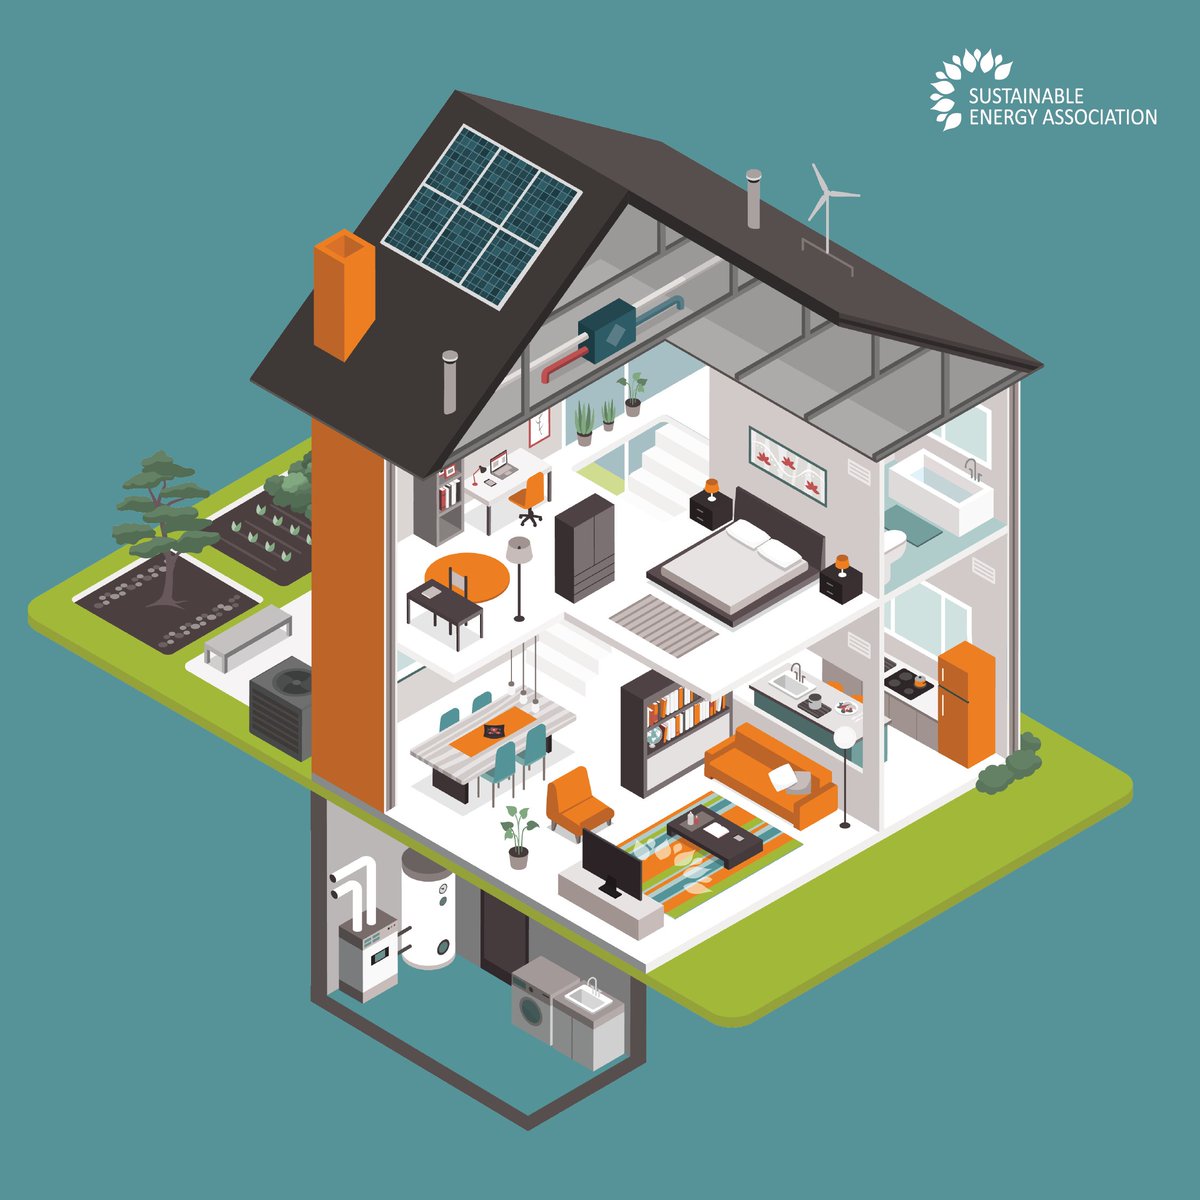 We recognise that there is no single solution to #decarbonising energy in buildings. A range of technology solutions, financing models, and delivery methods are required. Reducing the #energy needs of buildings requires a tailored, multi #technology solution.